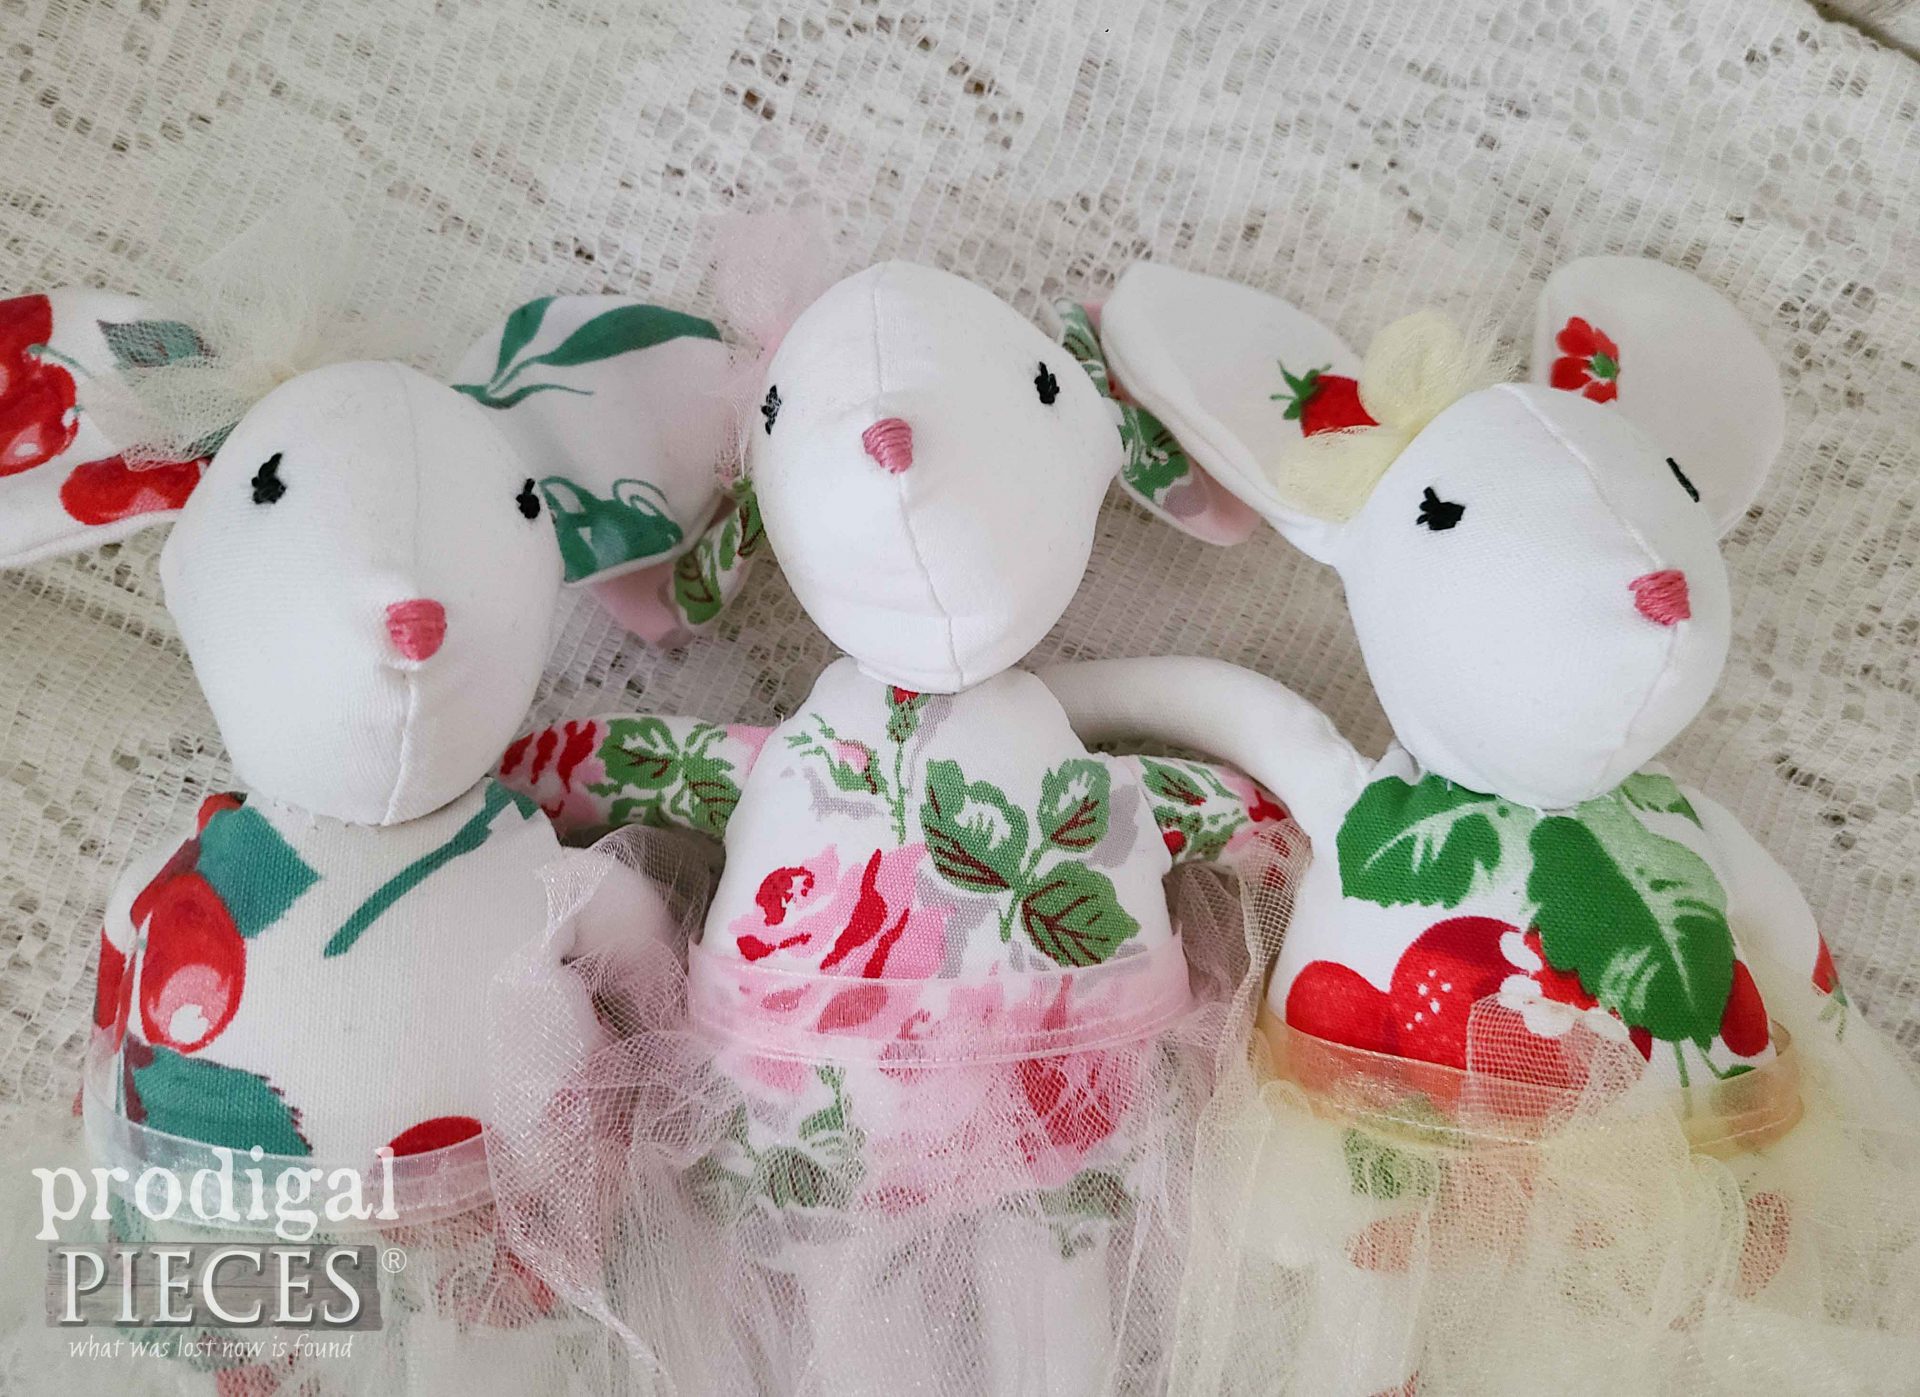 Handmade Mouse Ballerina Dolls from Vintage Tablecloth by Larissa of Prodigal Pieces | prodigalpieces.com #prodigalpieces #handmade #mouse #handmade #upcycled